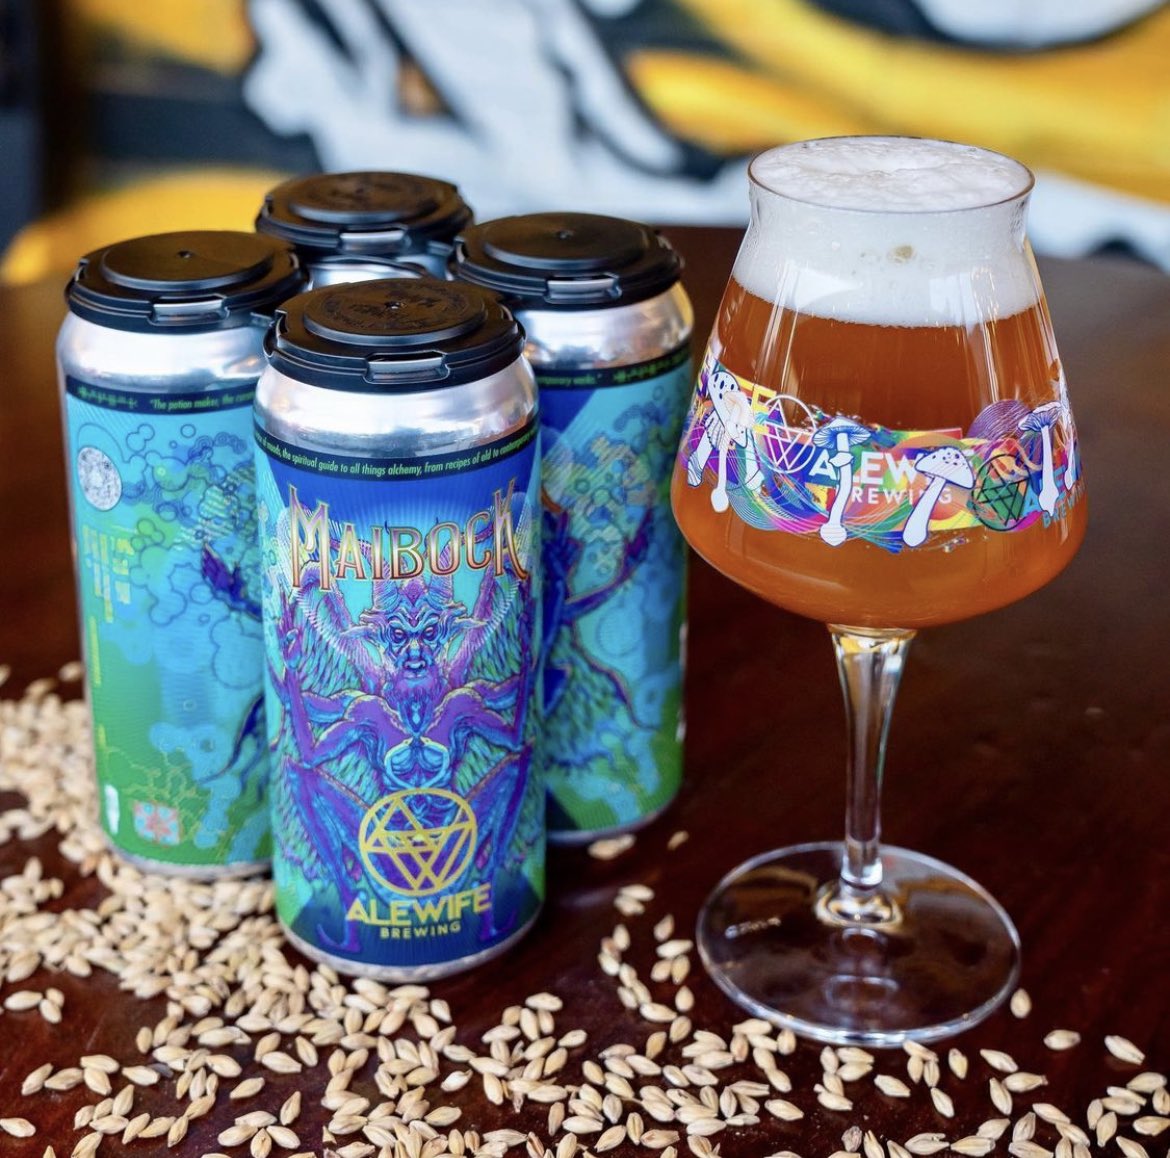 Introducing Alewife Maibock, with crispy & floral hoppiness brought to you by Mittelfruh hops. A more balanced assertion of maltiness and sweetness with 7.9% ABV.
#alewifebrewing #tasteislife